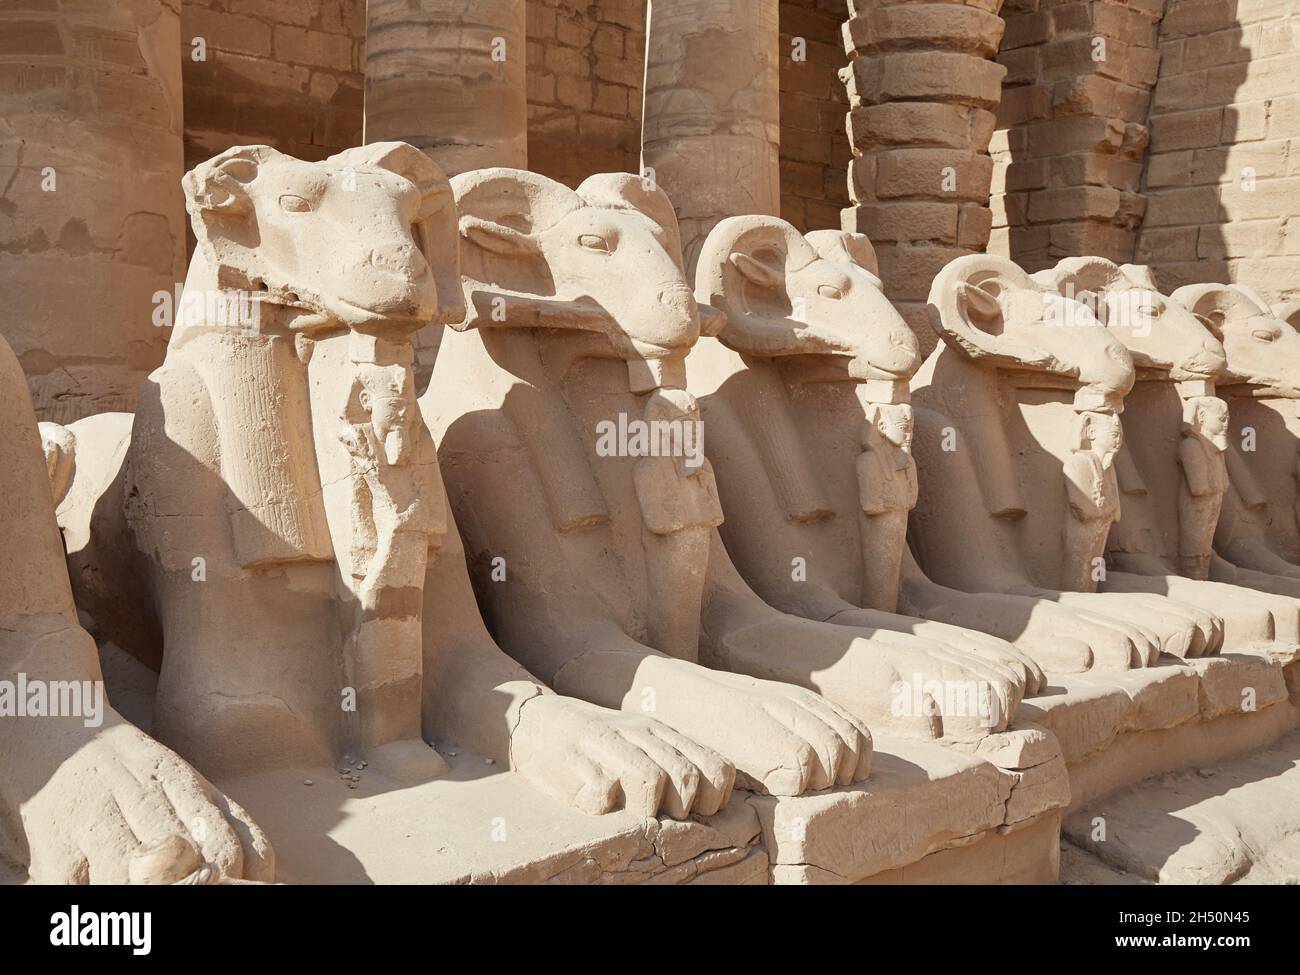 The sam-headed sphinxes, symbols of Amun, lined up at Luxor, Egypt's Karnak Temple Stock Photo